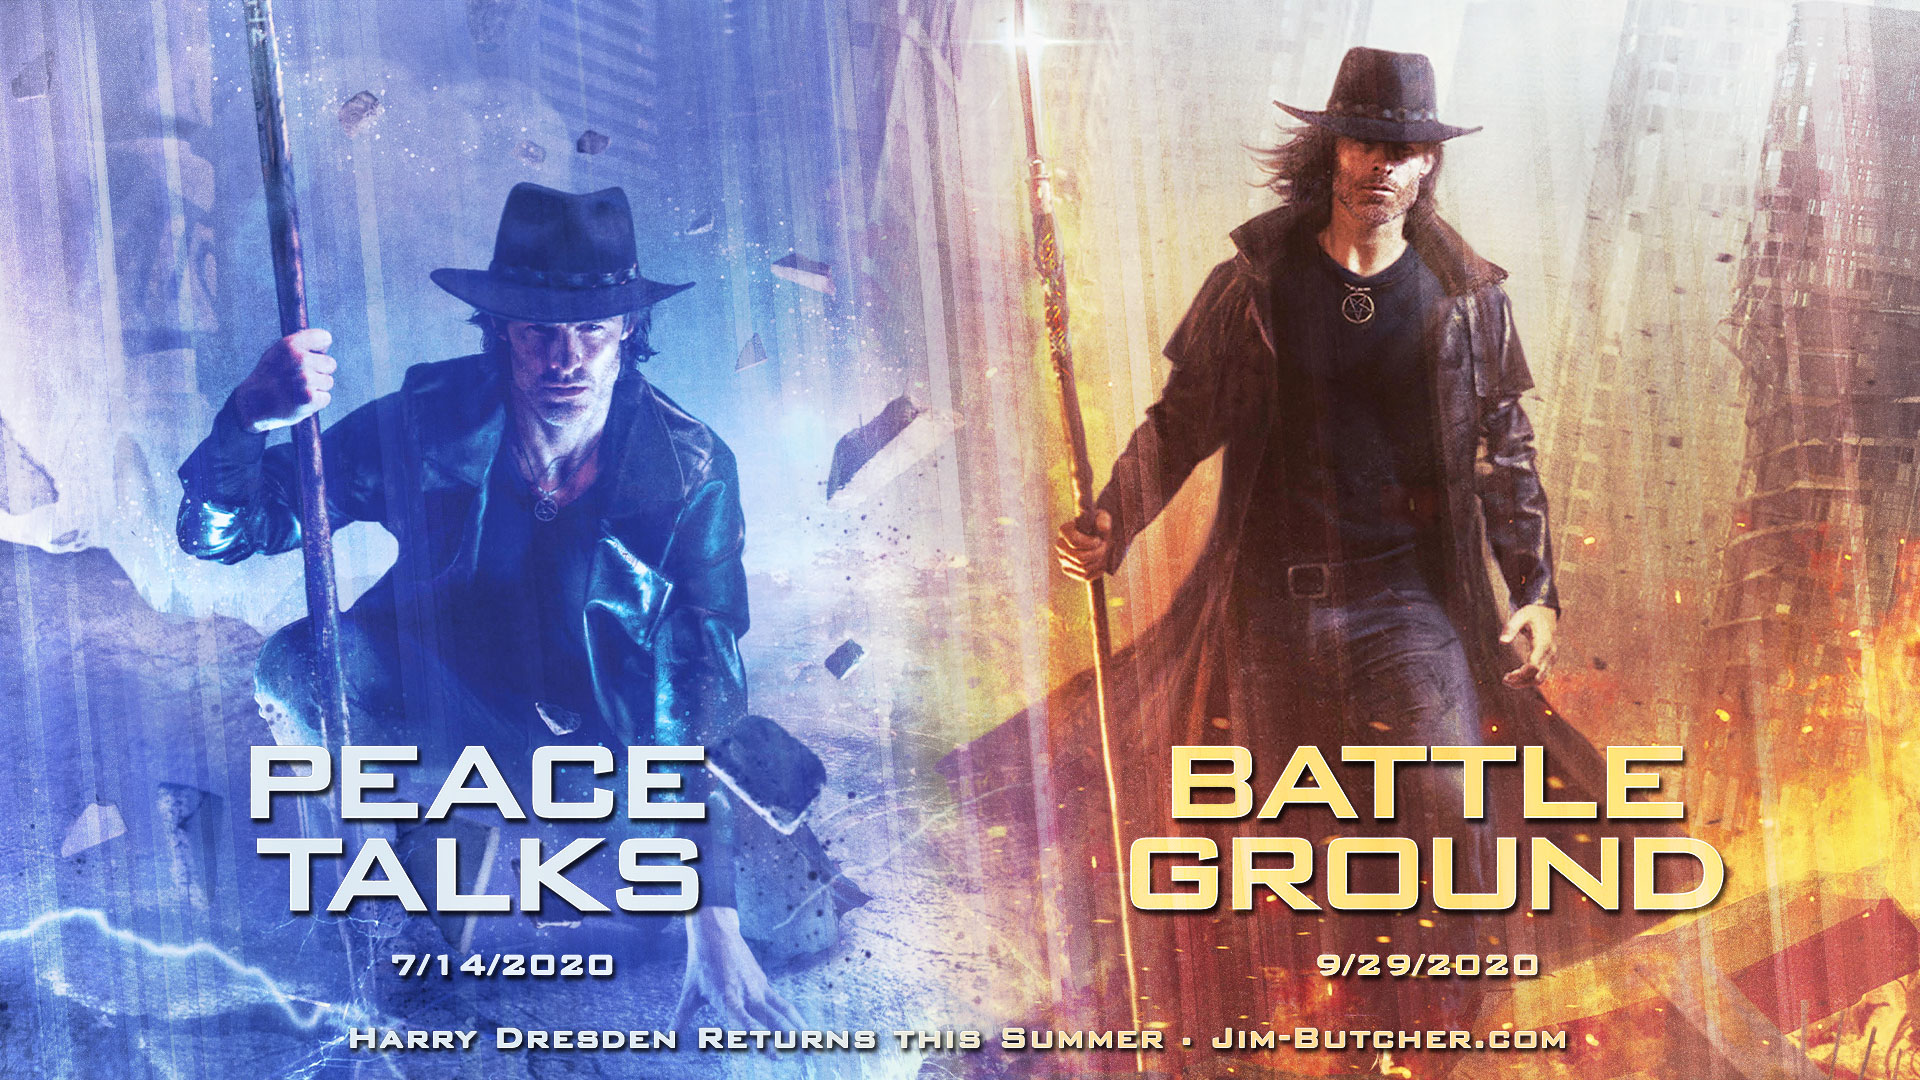 Should You Read The Dresden Files? A Personal Take